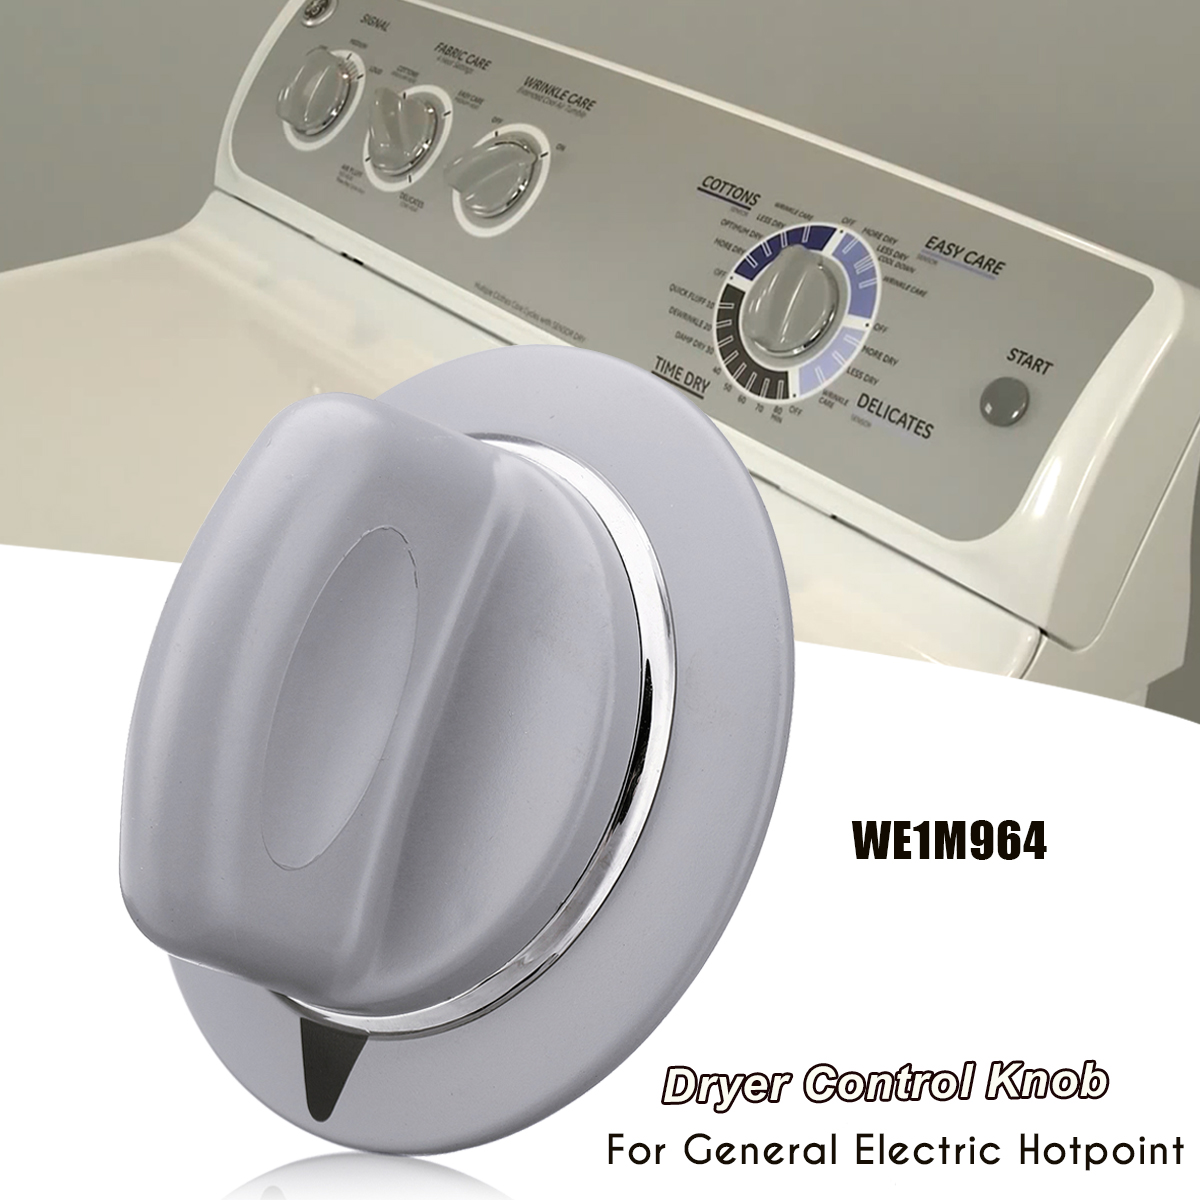 General electric dryer